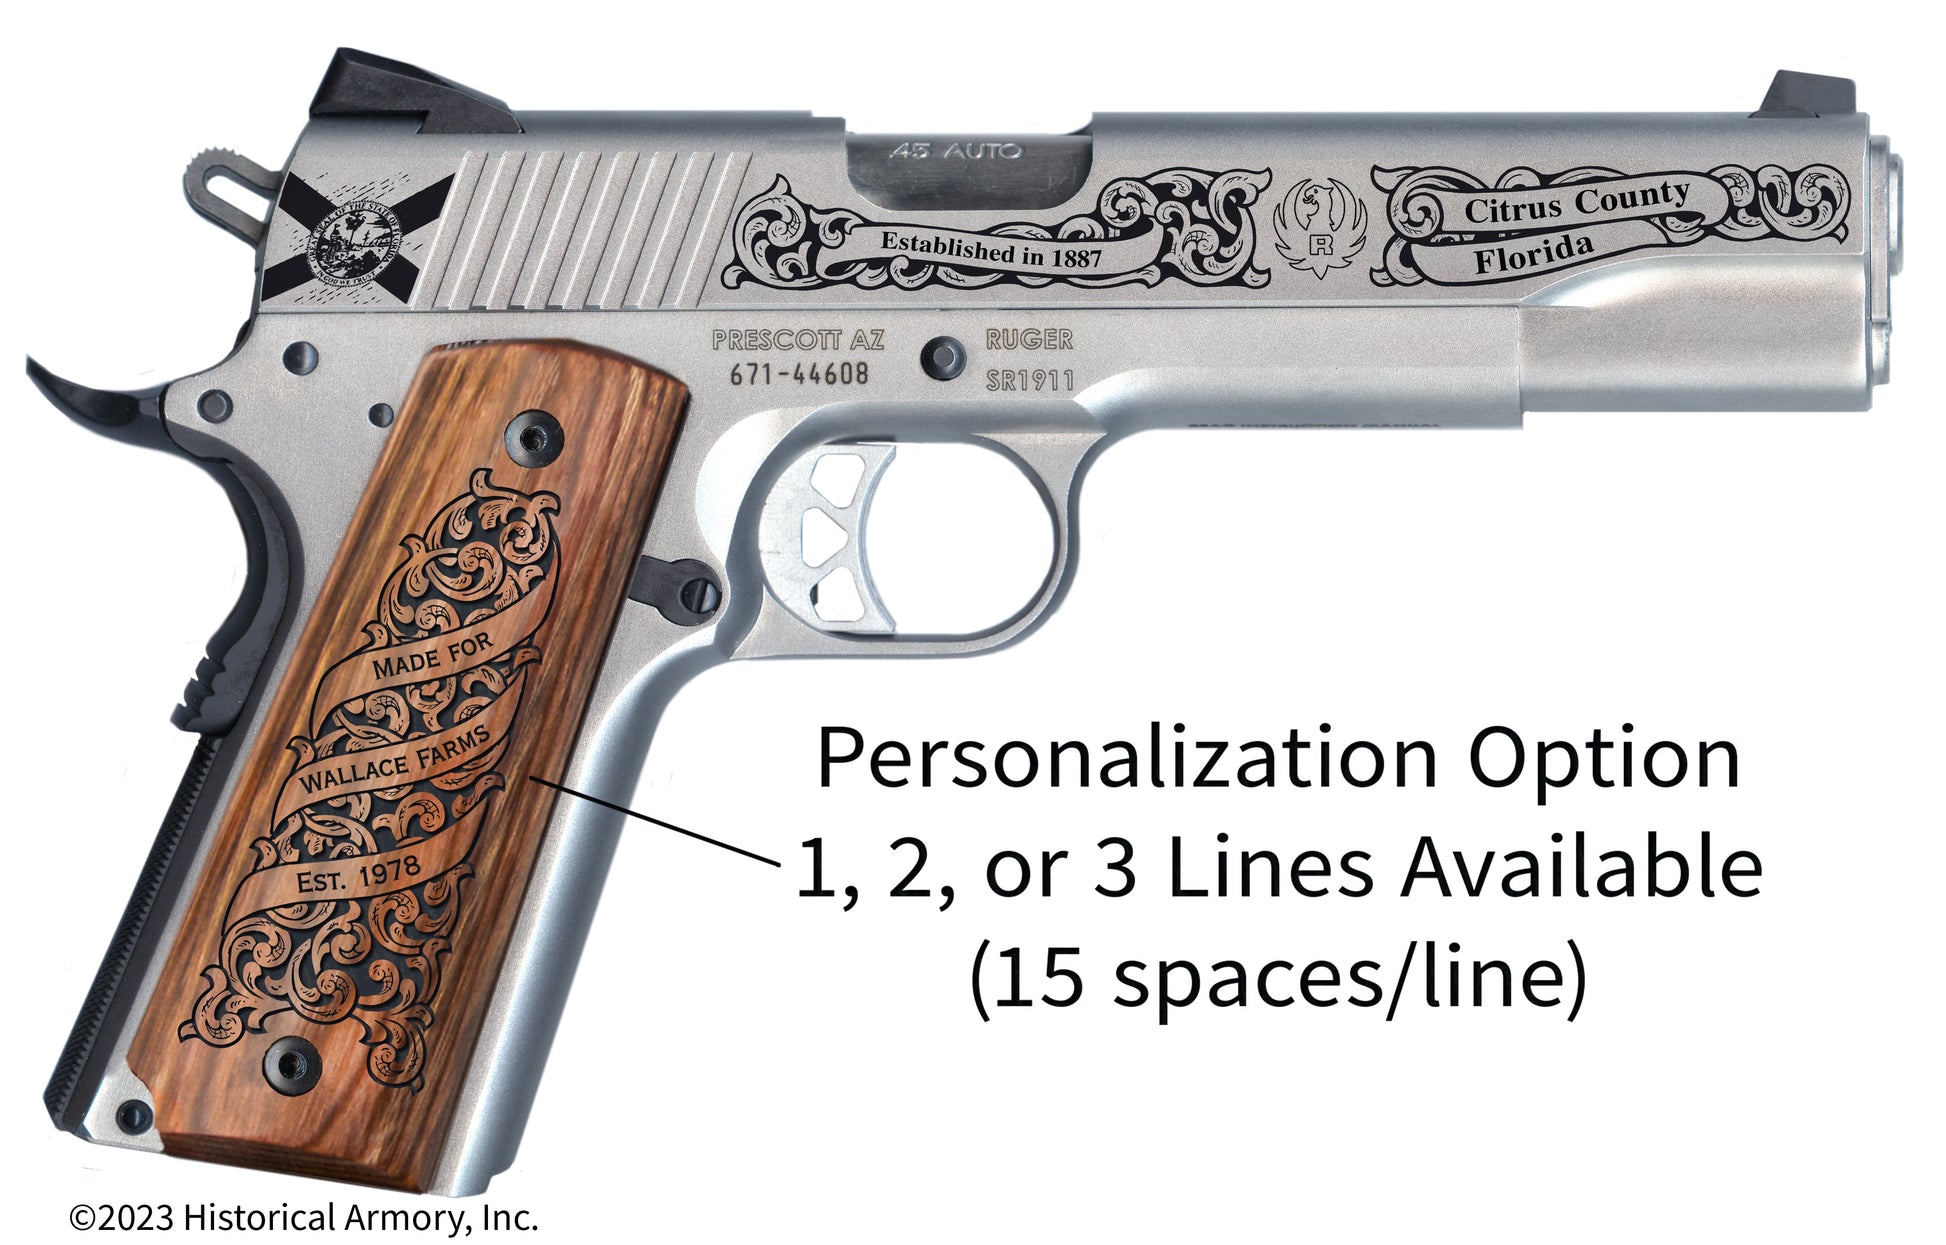 Citrus County Florida Personalized Engraved .45 Auto Ruger 1911